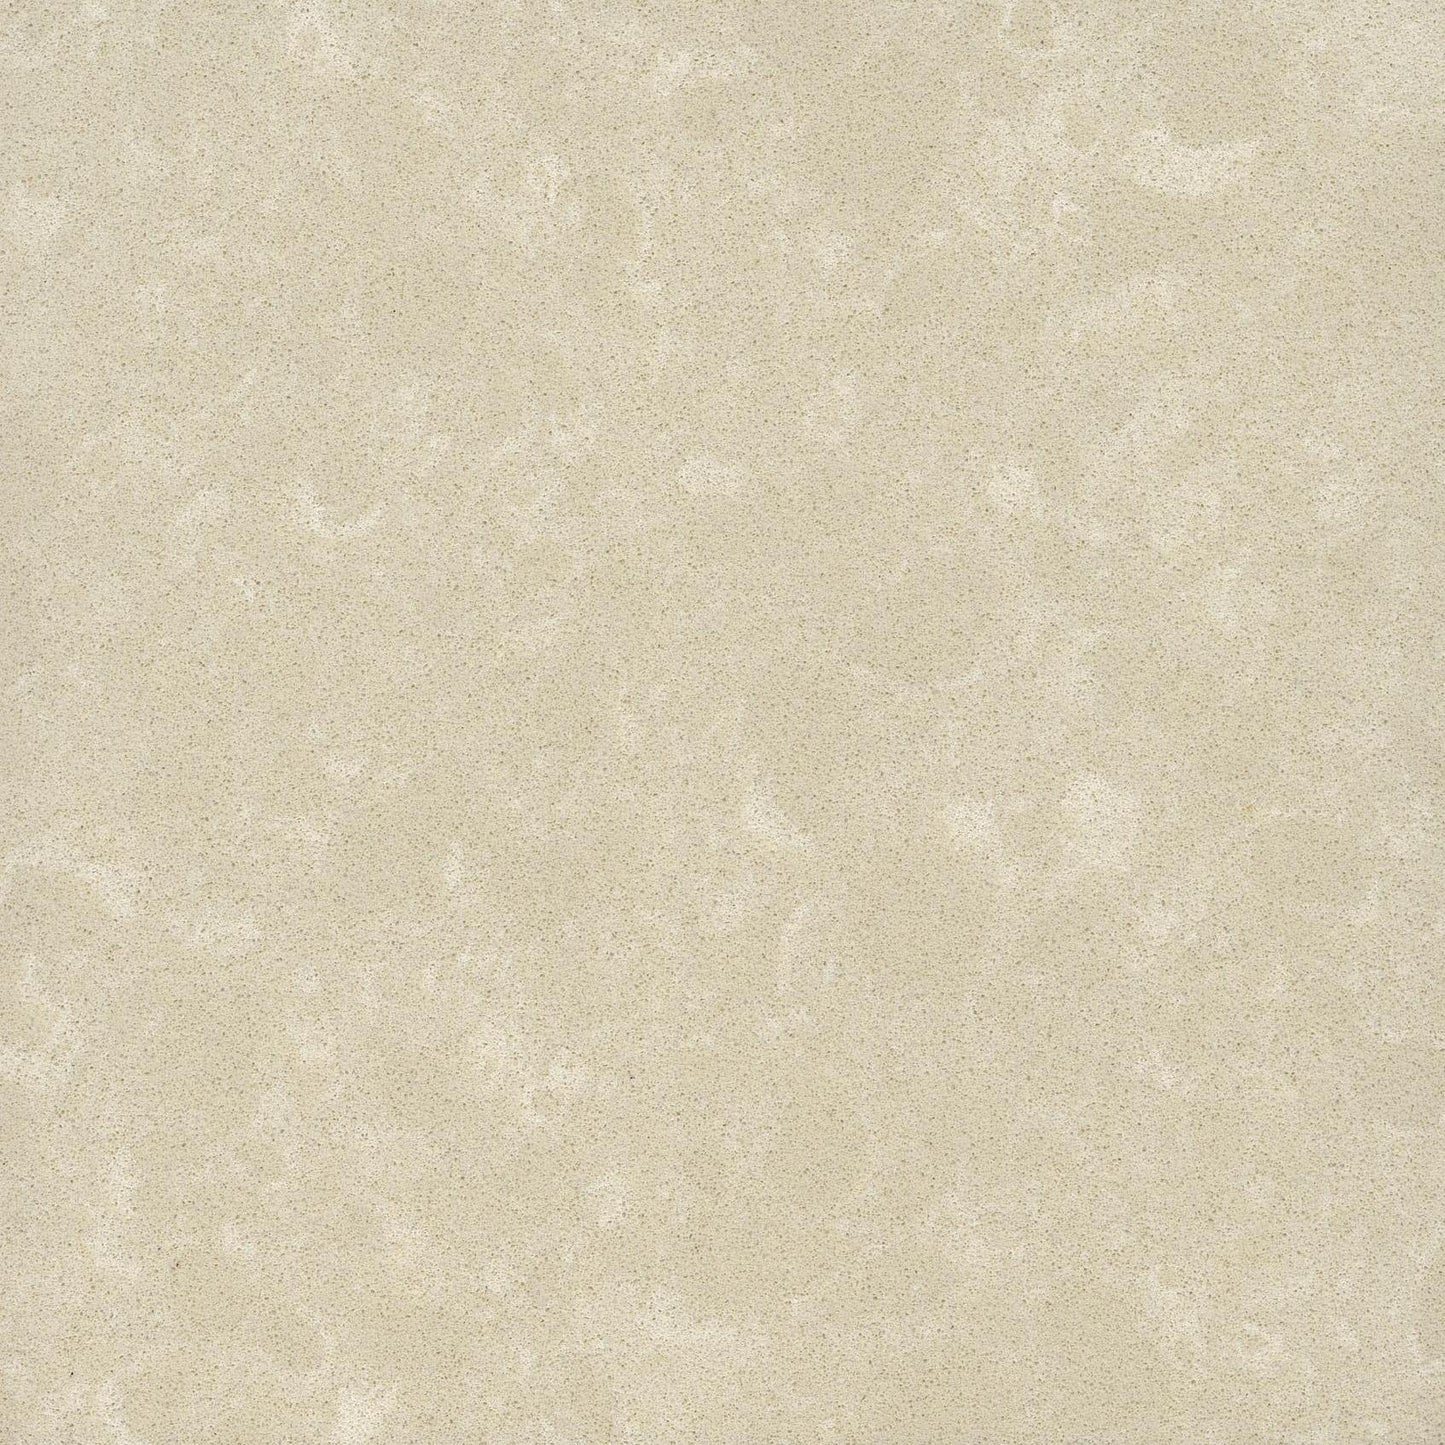 Tigris Sand, Quartz Stone Surface Material - Outlet stock from Cosentino.